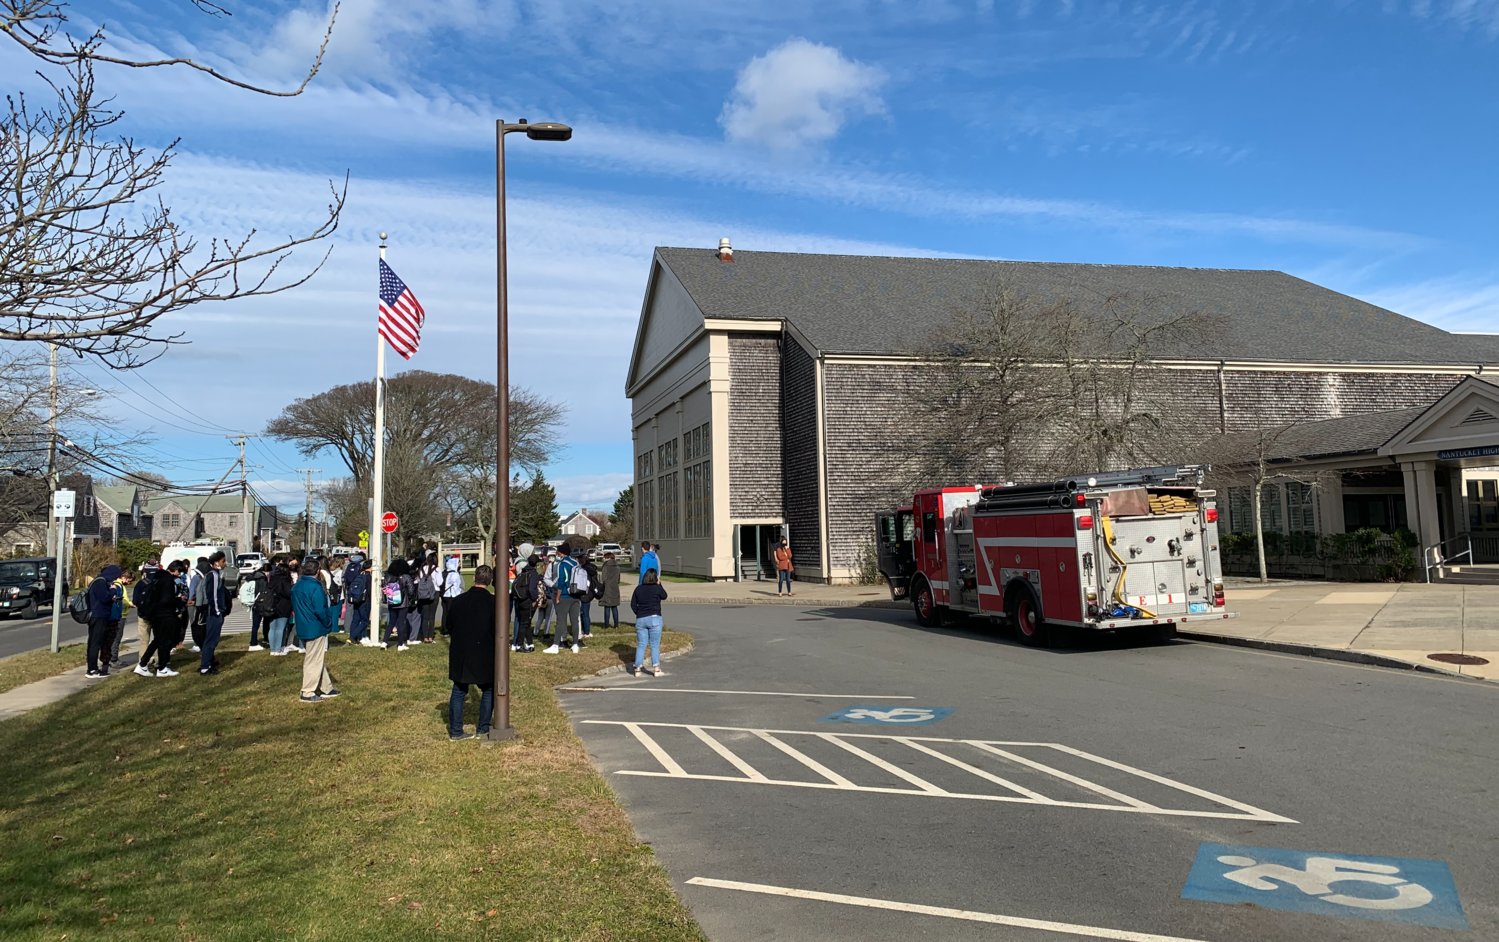 Nantucket High School was briefly evacuated Friday afternoon after smoke was reported in the auditorium.